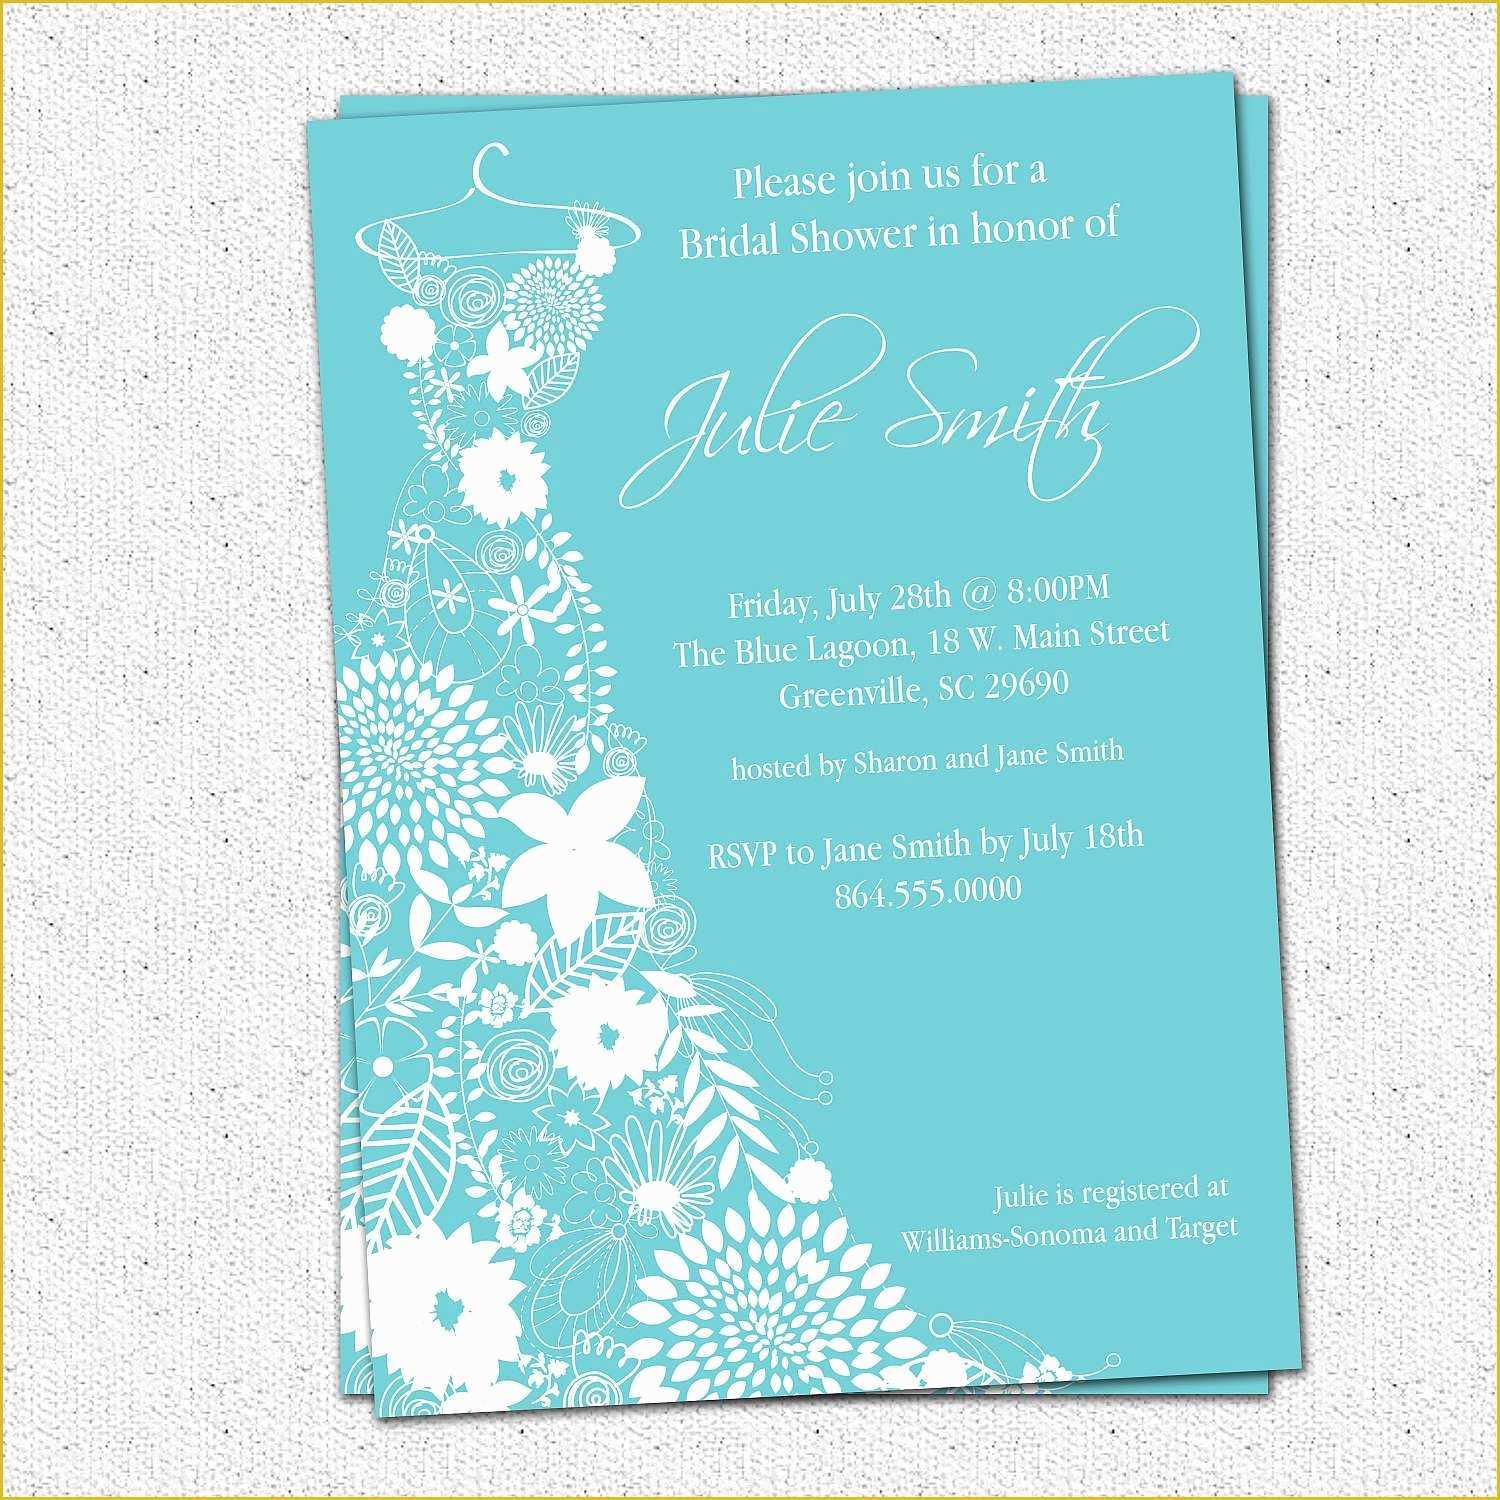 Free Bridal Shower Invitation Templates for Word Of Bridal Shower Invitation Templates Microsoft Word